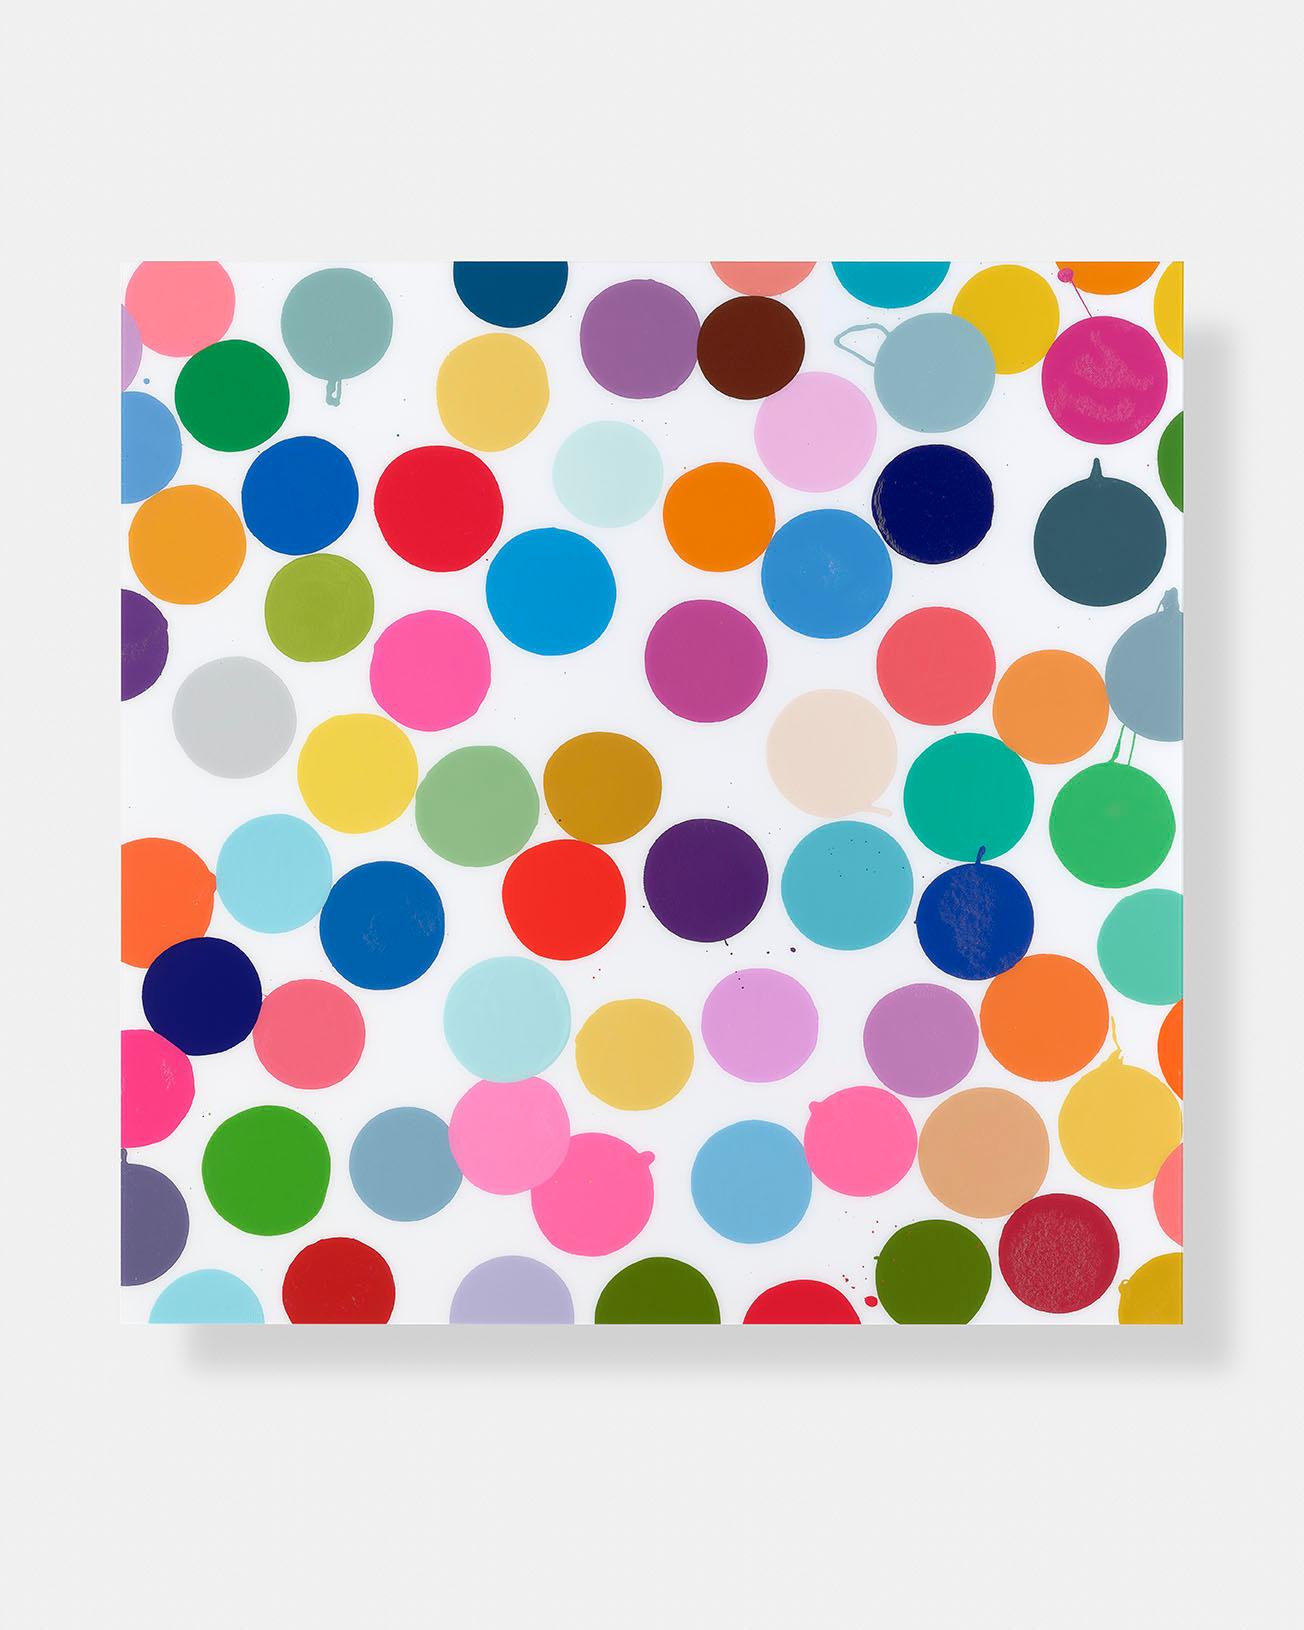 DAMIEN HIRST
Plaza, 2018
Diasec-mounted giclée print on aluminium panel
Signed and numbered from the edition of 100 verso
Published by HENI Productions, London
Within the original foam-lined box
Sheet: 90.0 × 90.0 cm (35.4 × 35.4 in)

 HENI Editions